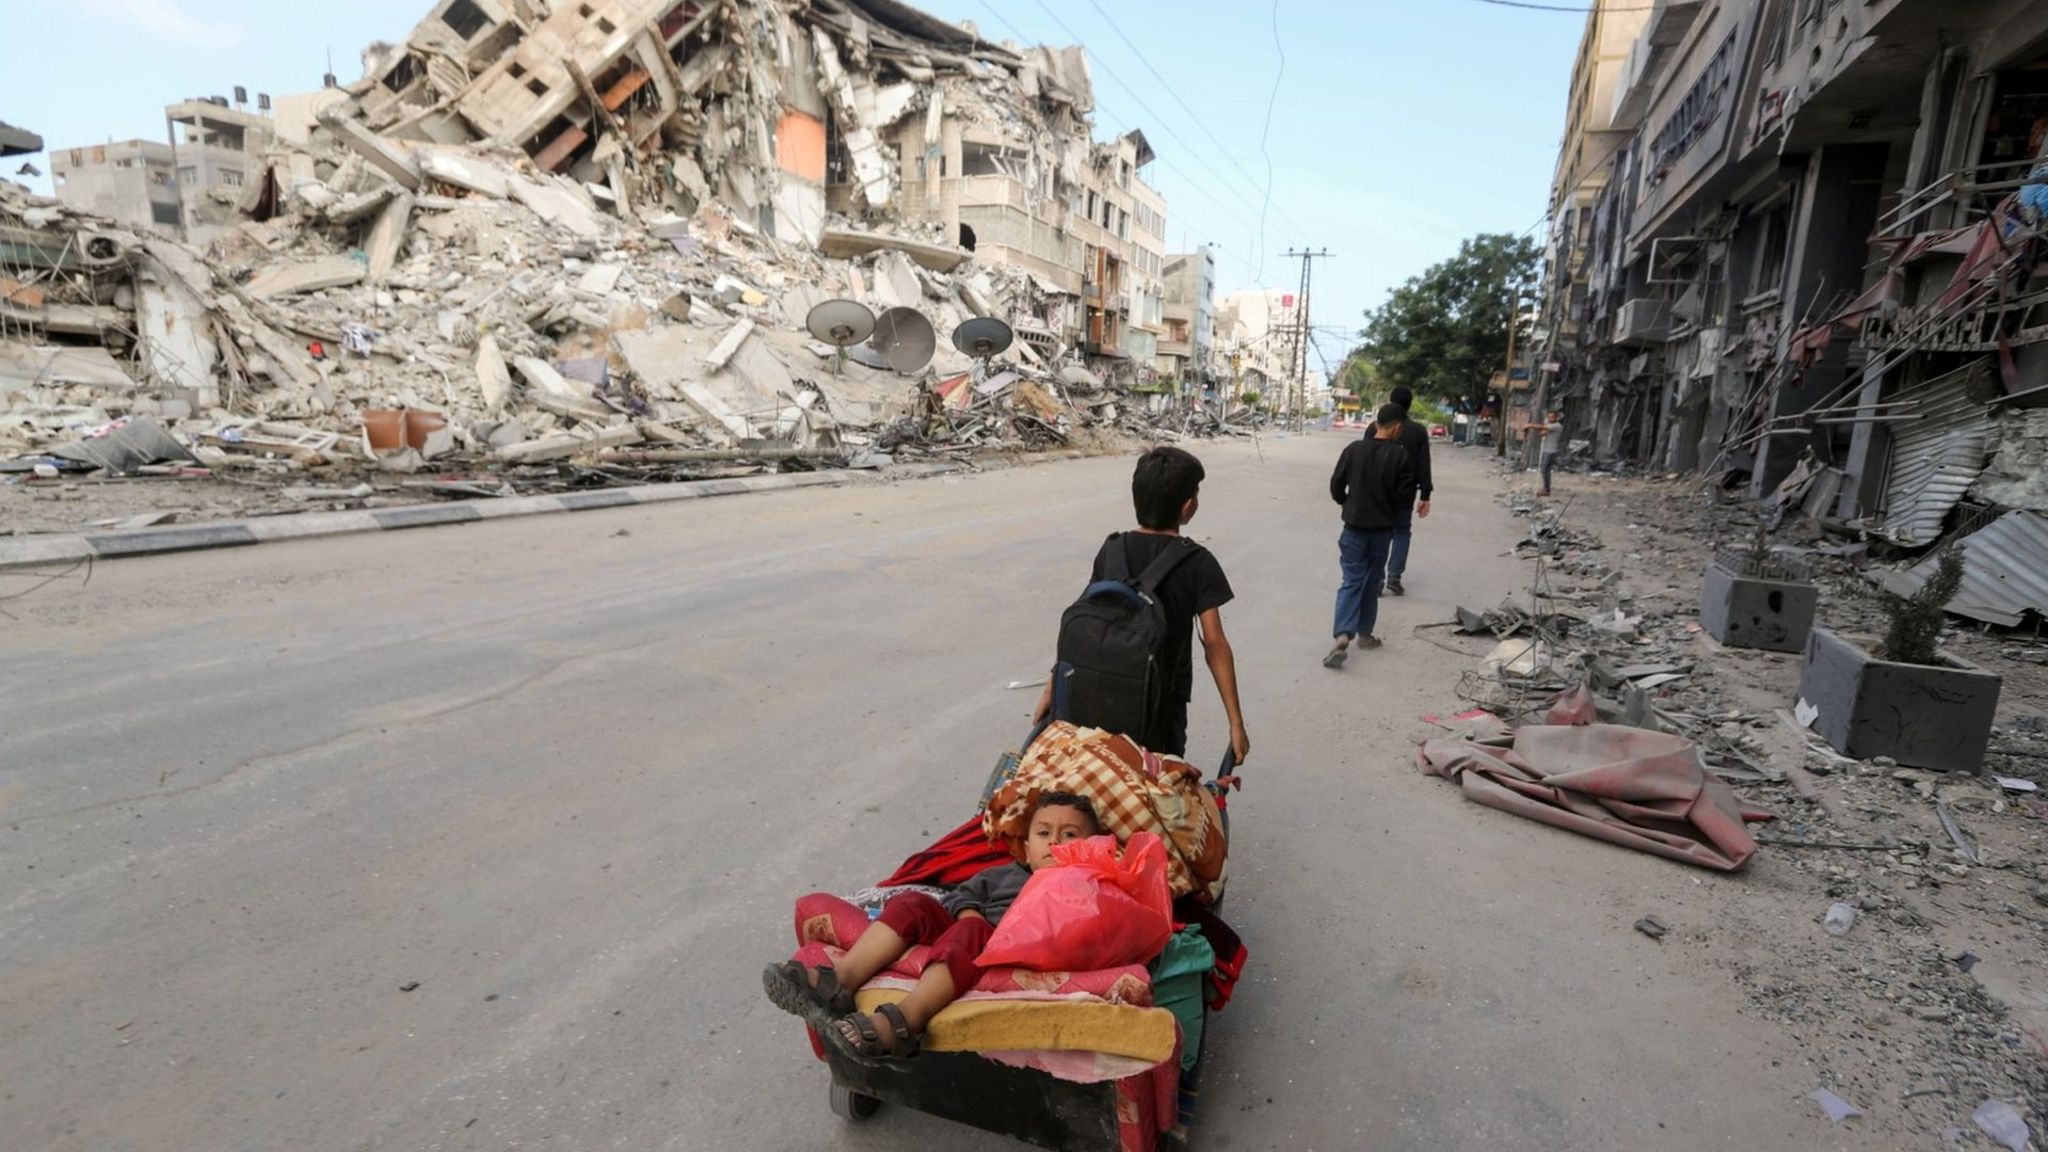 A Palestinian boy pulls a cart carrying his brother and their belongings as they flee their home during Israeli air and artillery strikes, near the site of destroyed a tower block in Gaza City (14 May 2021)